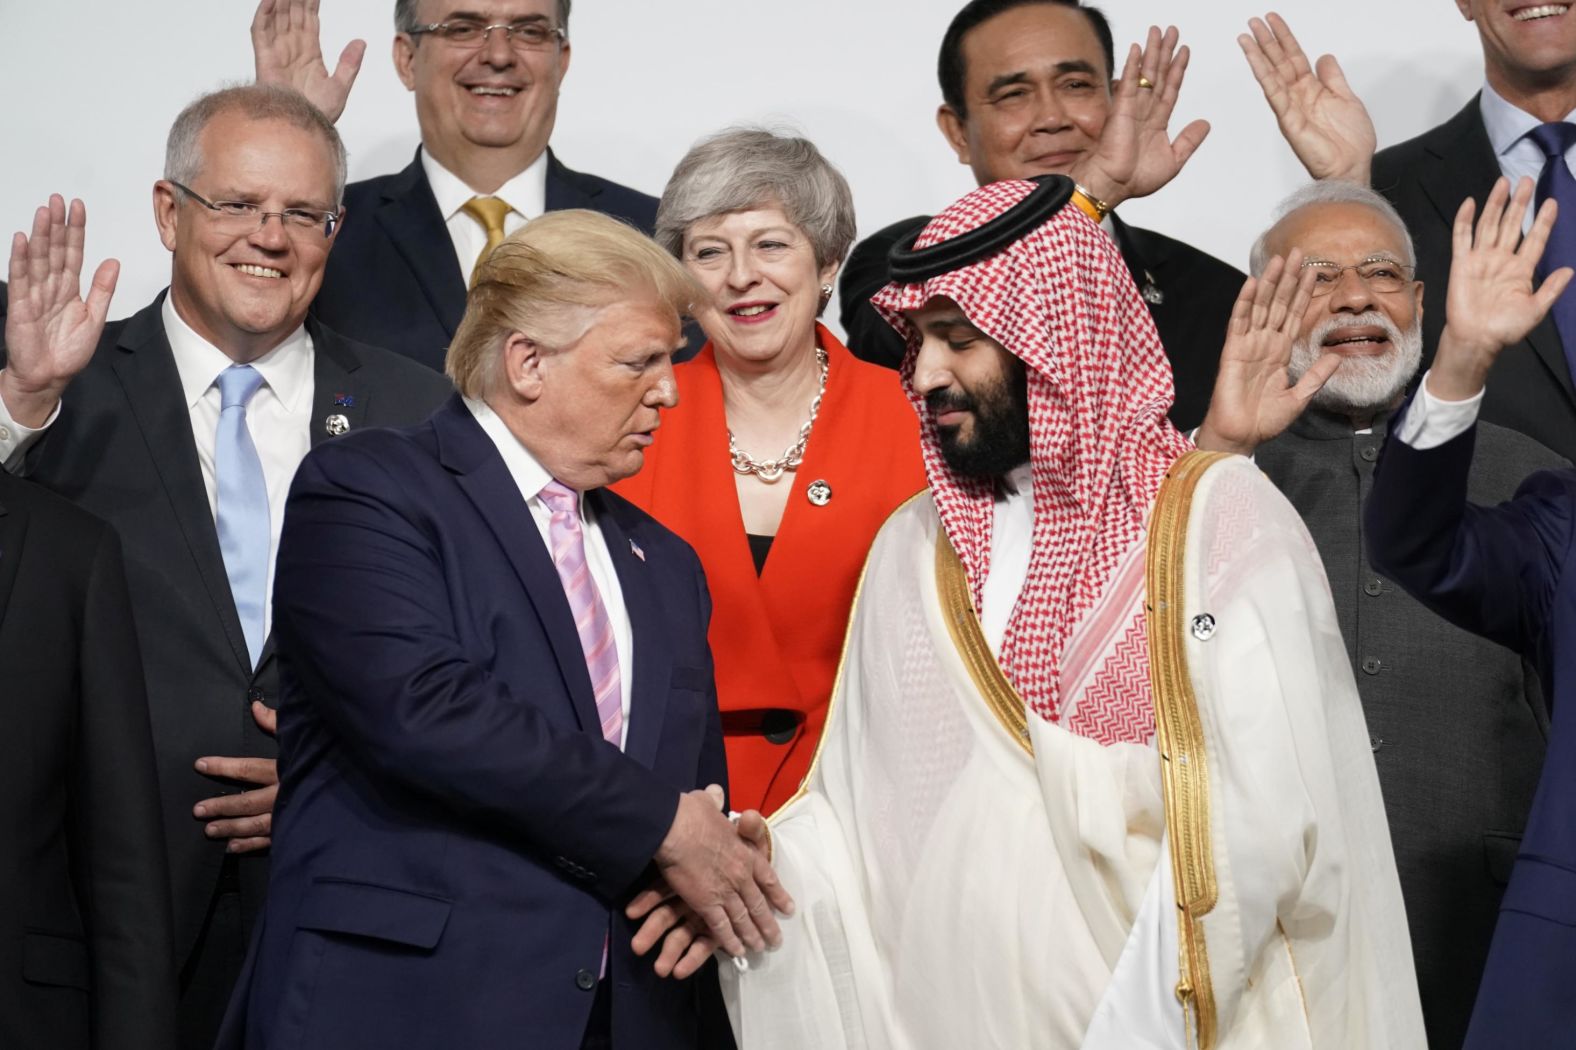 Saudi Crown Prince Mohammed bin Salman meets with President Trump during a photo session at the G20 summit.<br />